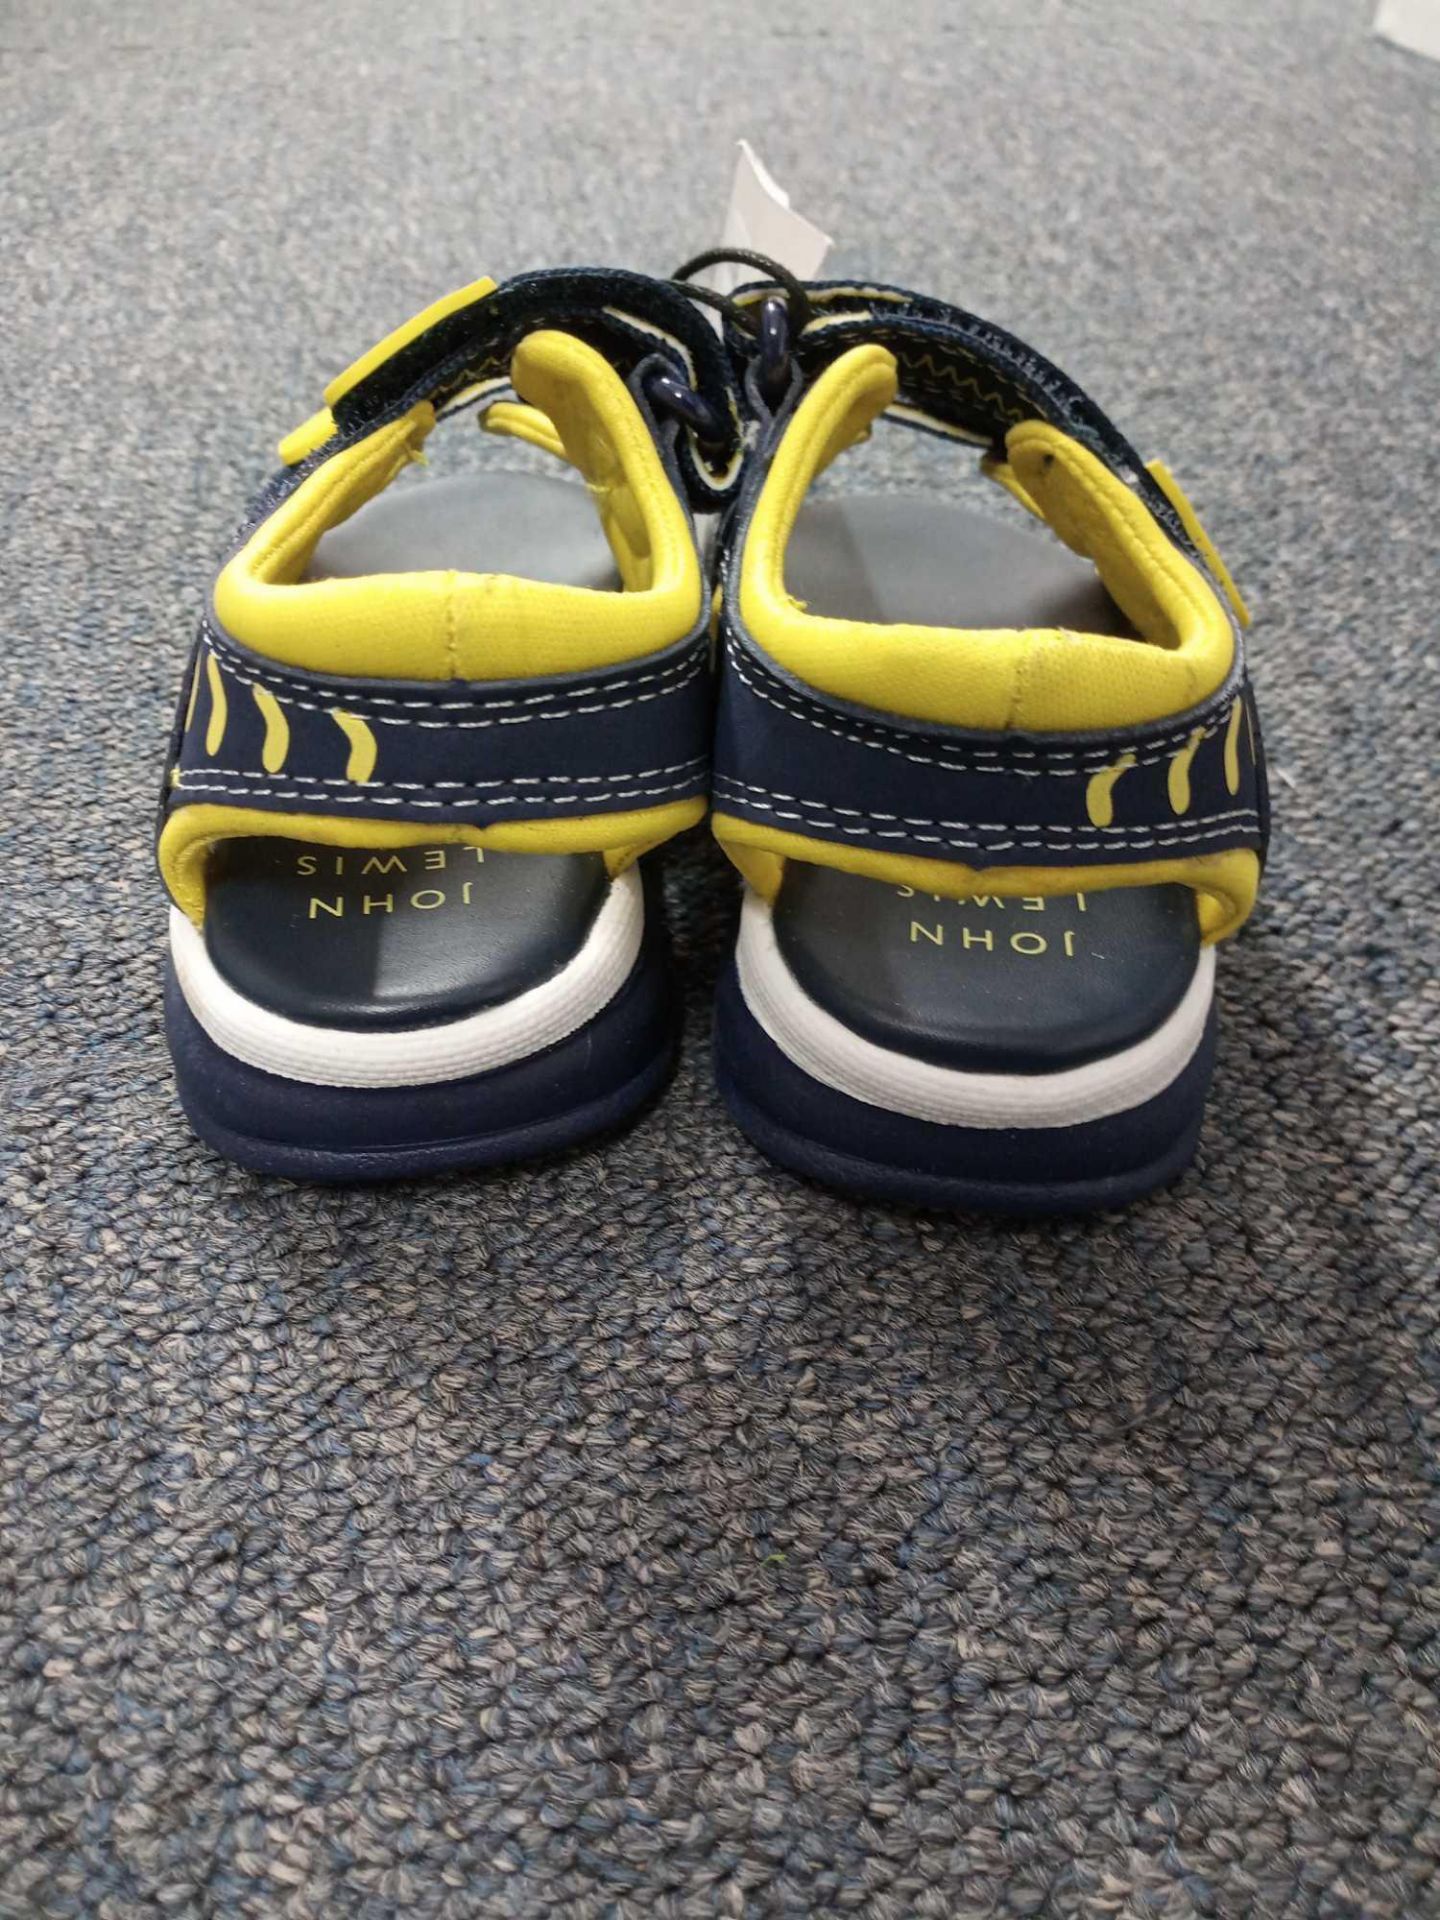 Boys John Lewis Sandals Size 4 Blue & Yellow (1493378)(Appraisals Available Upon Request) (Pictures - Image 3 of 3